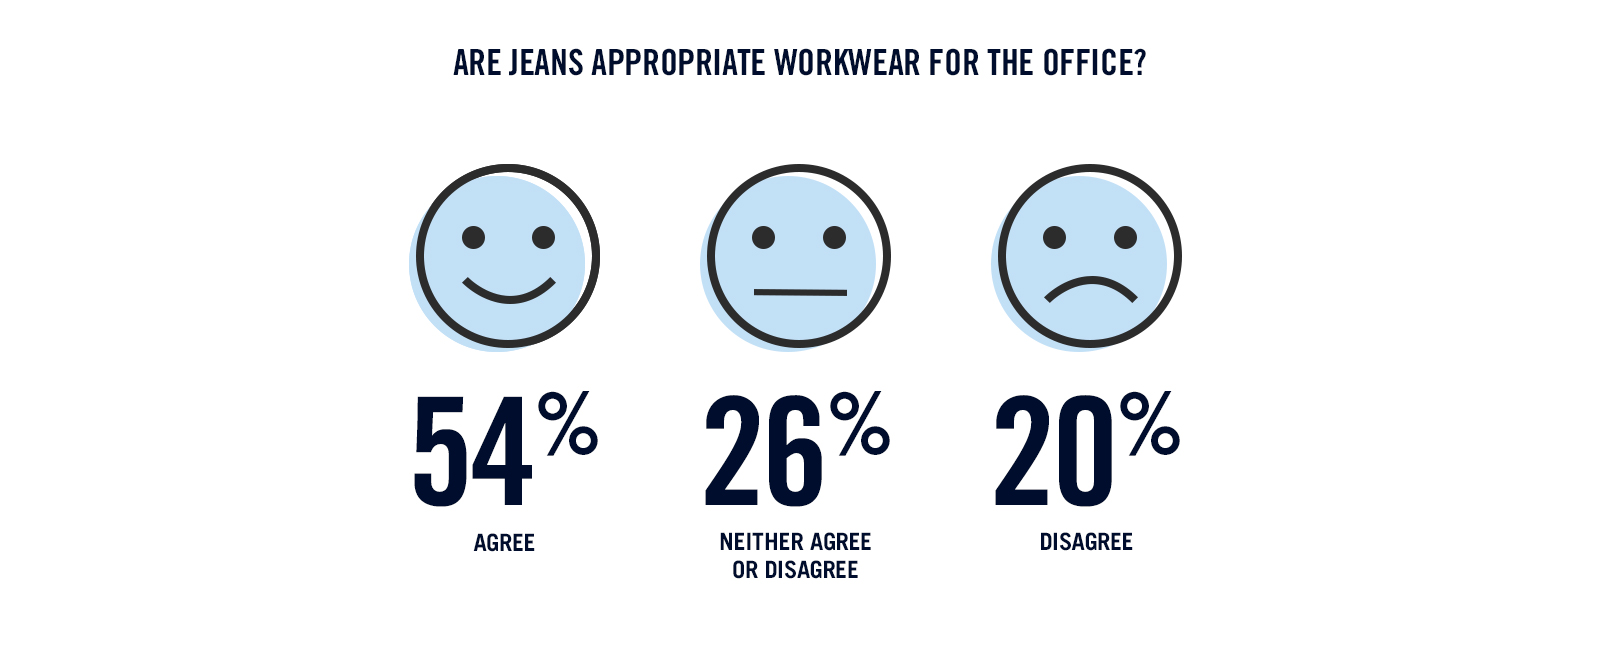 Are jeans appropriate workwear for the office?